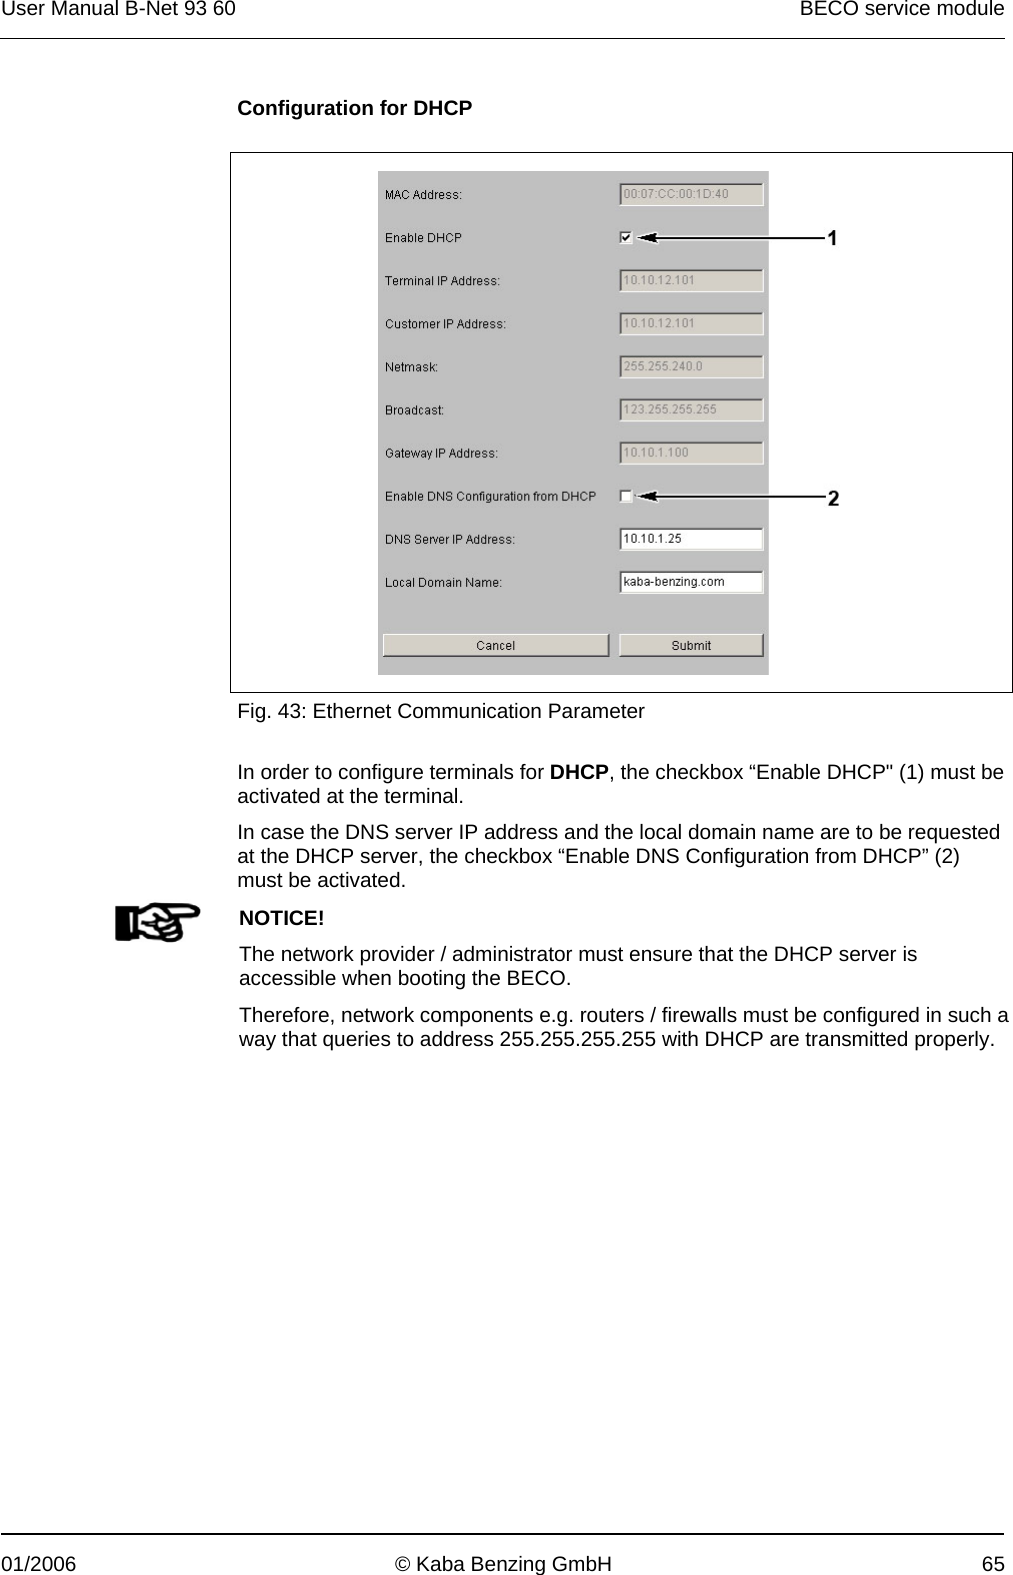 User Manual B-Net 93 60   BECO service module  01/2006  © Kaba Benzing GmbH  65 Configuration for DHCP    Fig. 43: Ethernet Communication Parameter  In order to configure terminals for DHCP, the checkbox “Enable DHCP&quot; (1) must be activated at the terminal. In case the DNS server IP address and the local domain name are to be requested at the DHCP server, the checkbox “Enable DNS Configuration from DHCP” (2) must be activated.   NOTICE! The network provider / administrator must ensure that the DHCP server is accessible when booting the BECO. Therefore, network components e.g. routers / firewalls must be configured in such a way that queries to address 255.255.255.255 with DHCP are transmitted properly.  